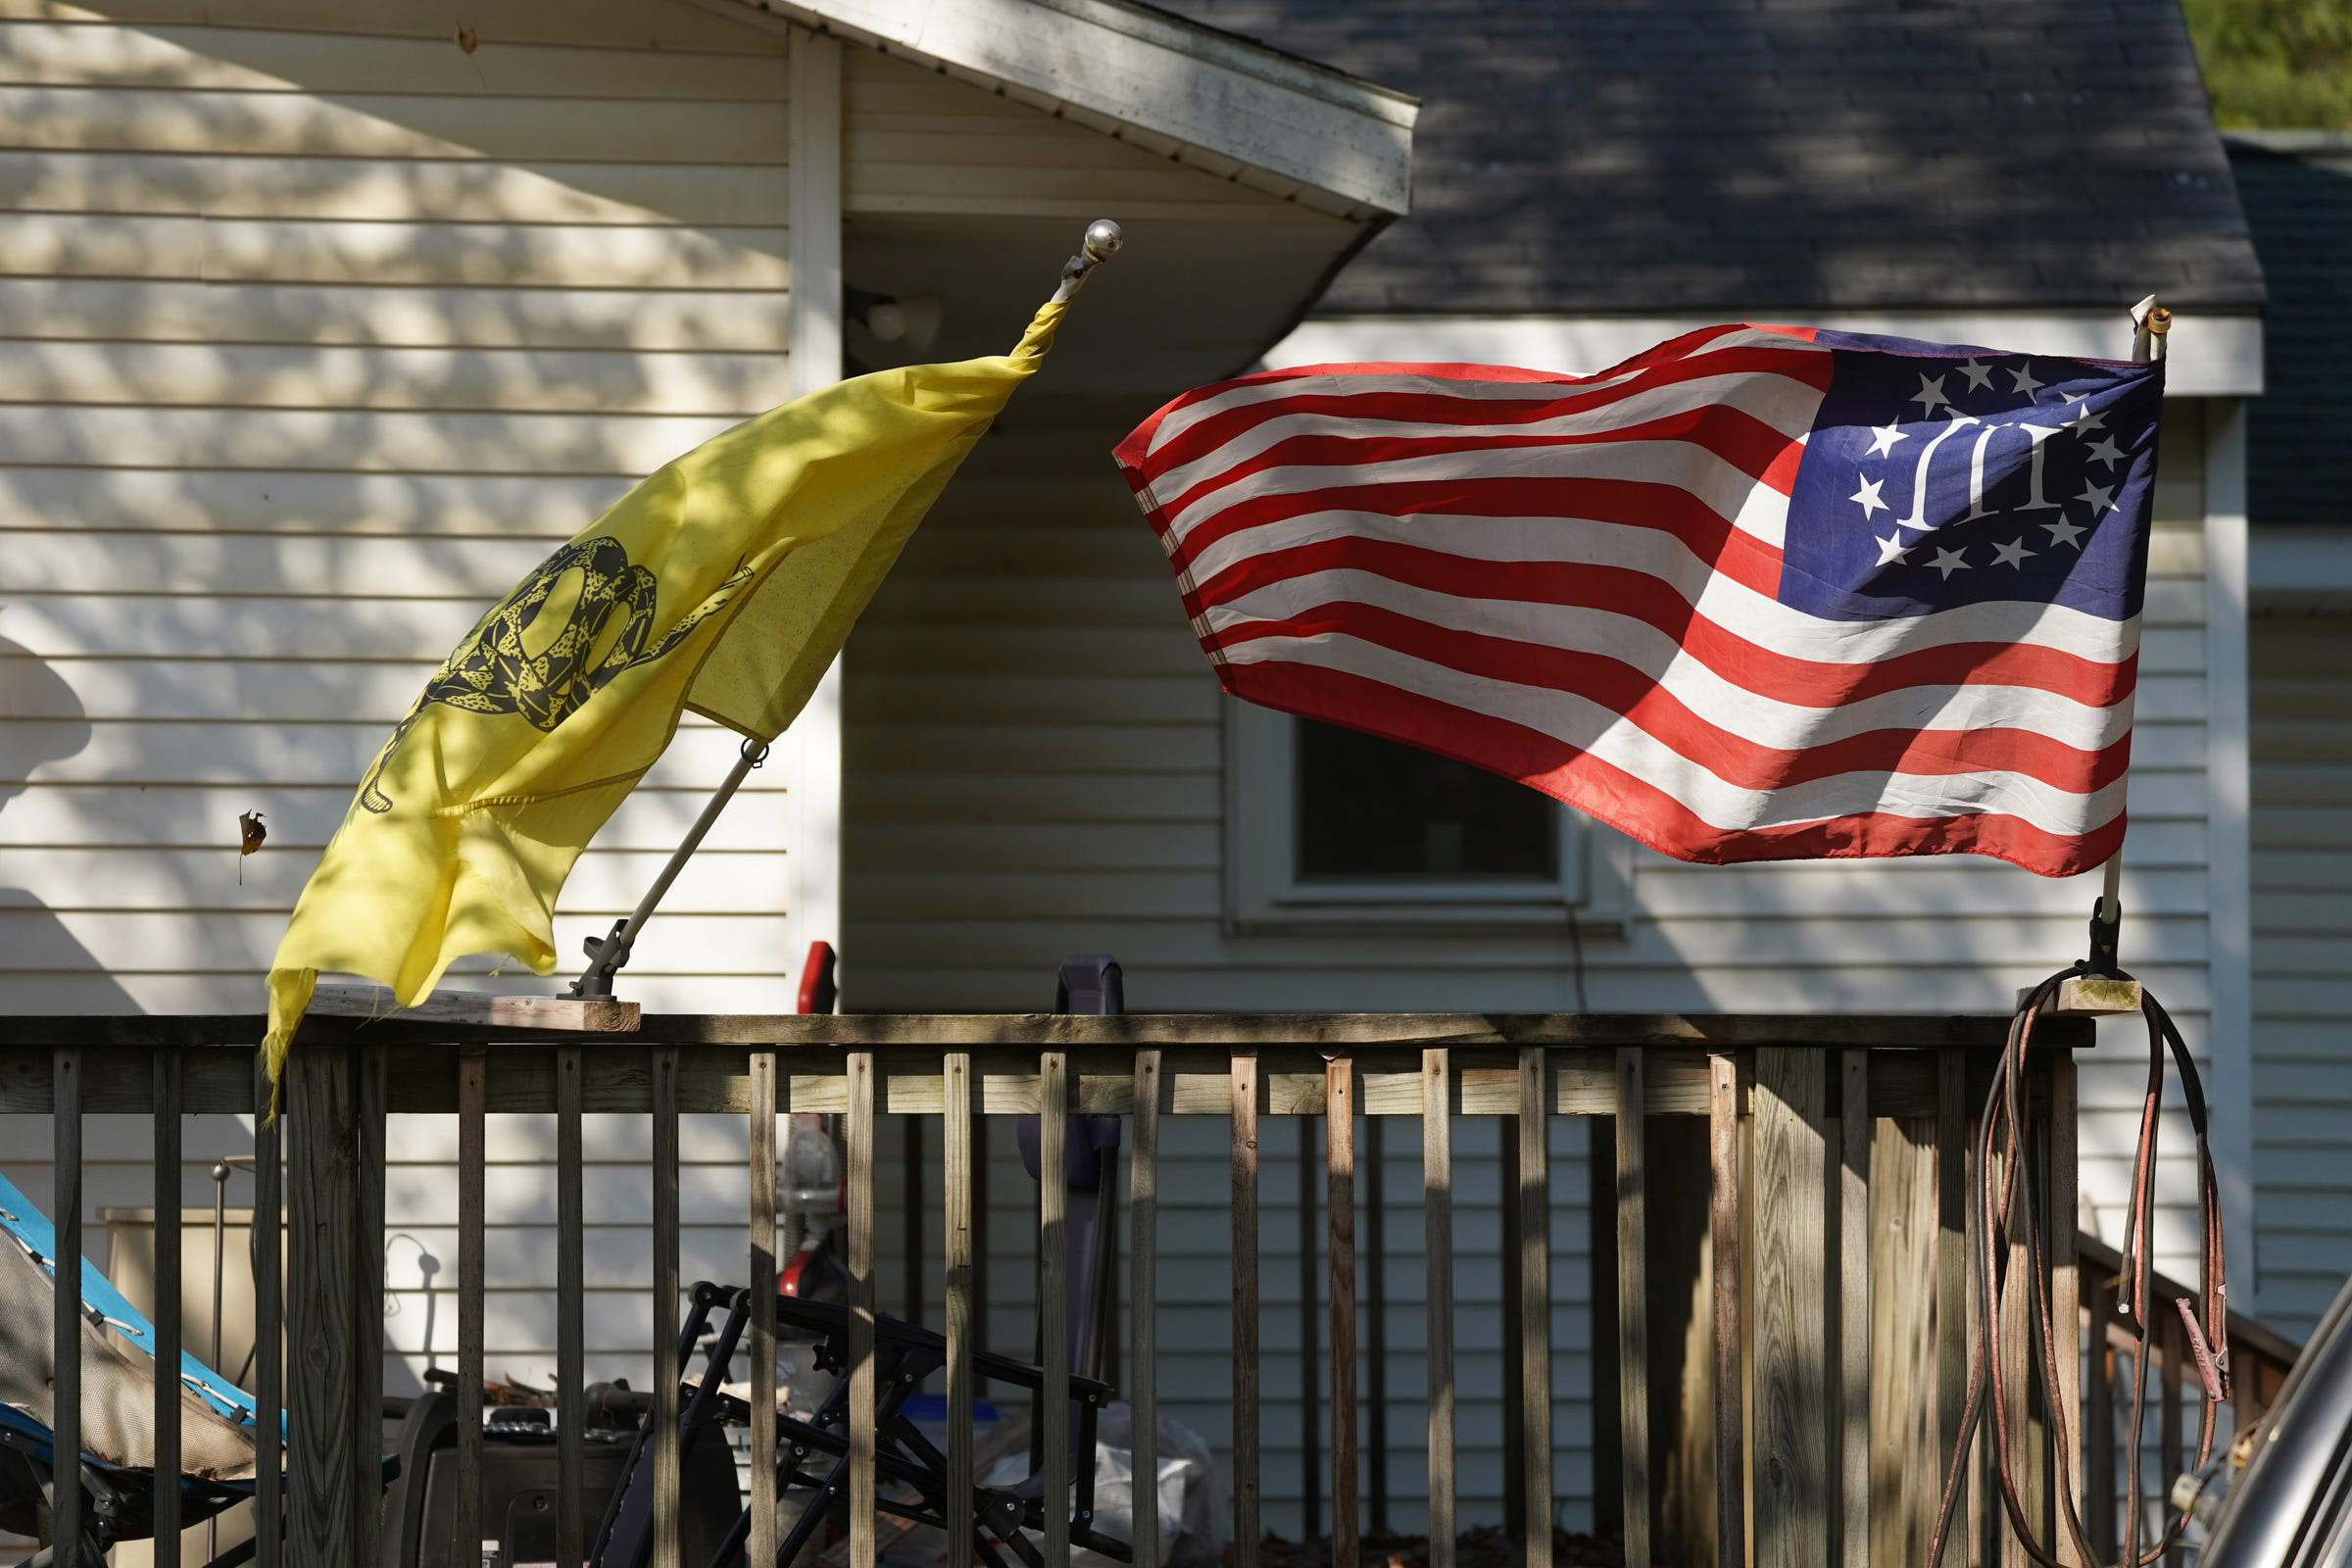 A Three Percenter flag and a Gadsden Flag fly onthe home of Michael Null in Plainwell, Mich., on October 9, 2020. Null one of 13 suspects accused of plotting to abduct and possibly harm Michigan Gov. Gretchen Whitmer. (Ryan Garza—USA Today Network/Sipa USA)